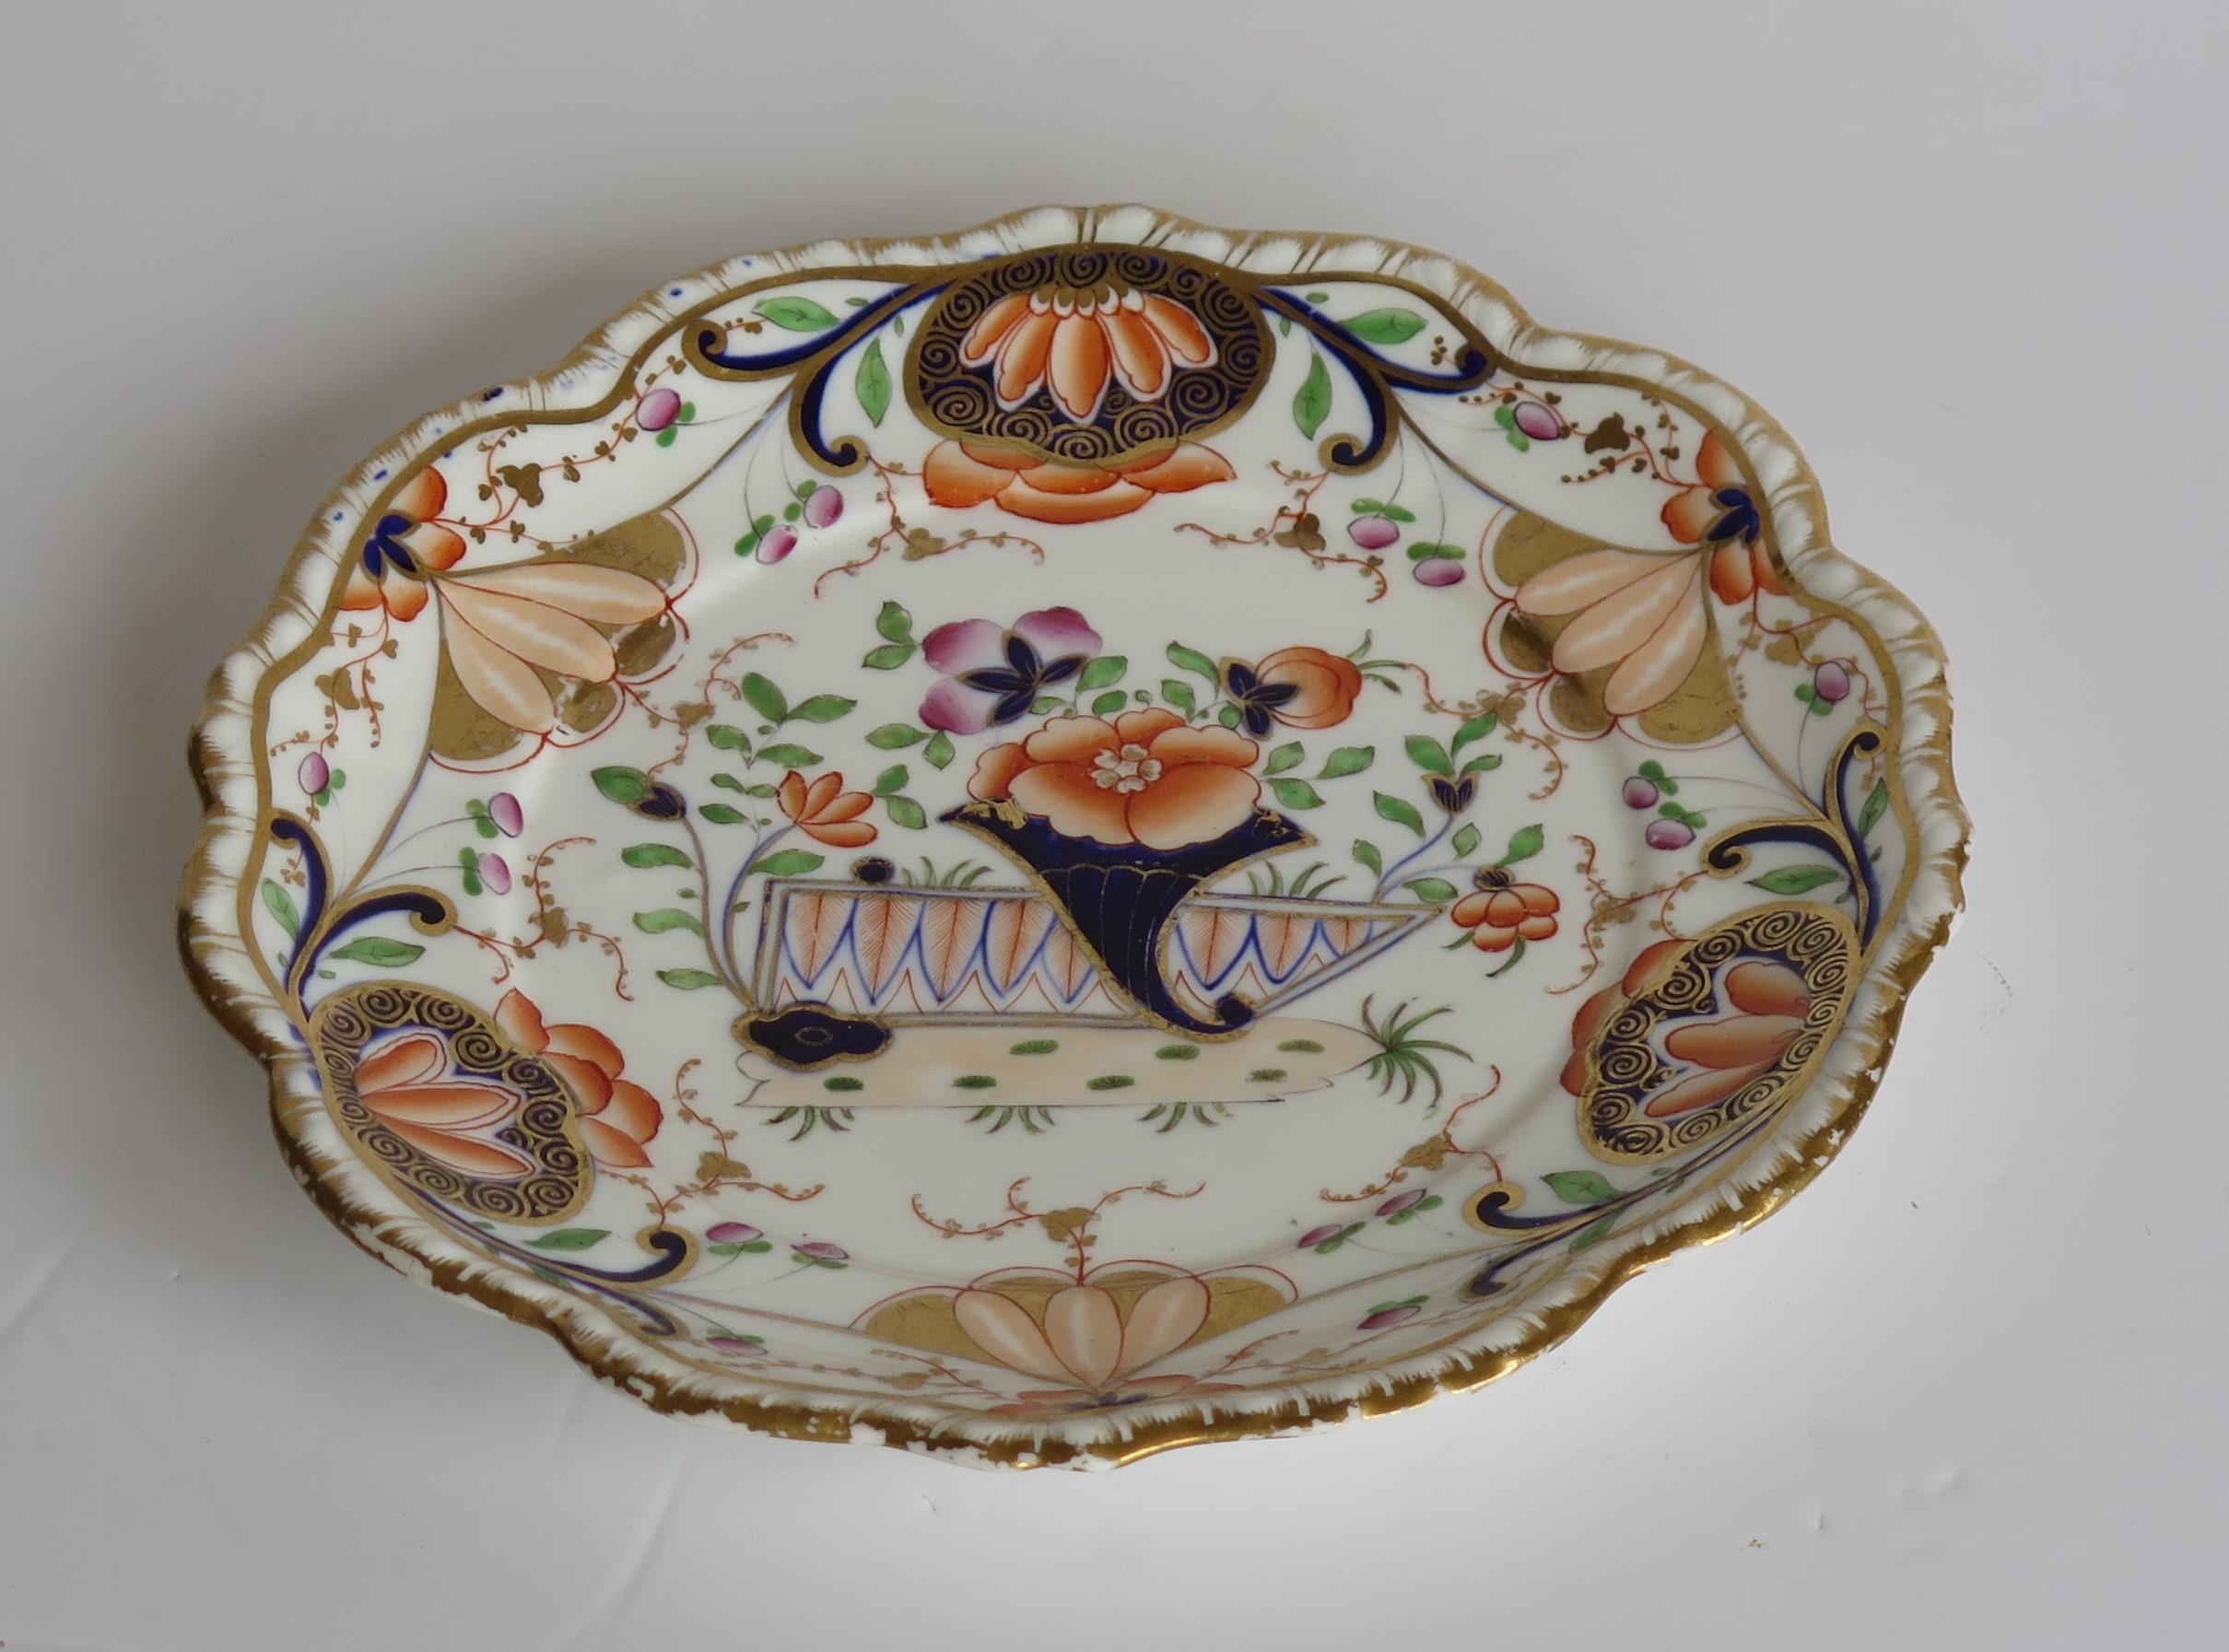 George III Early 19th Century Desert Dish Porcelain finely Hand Painted, Staffordshire, UK